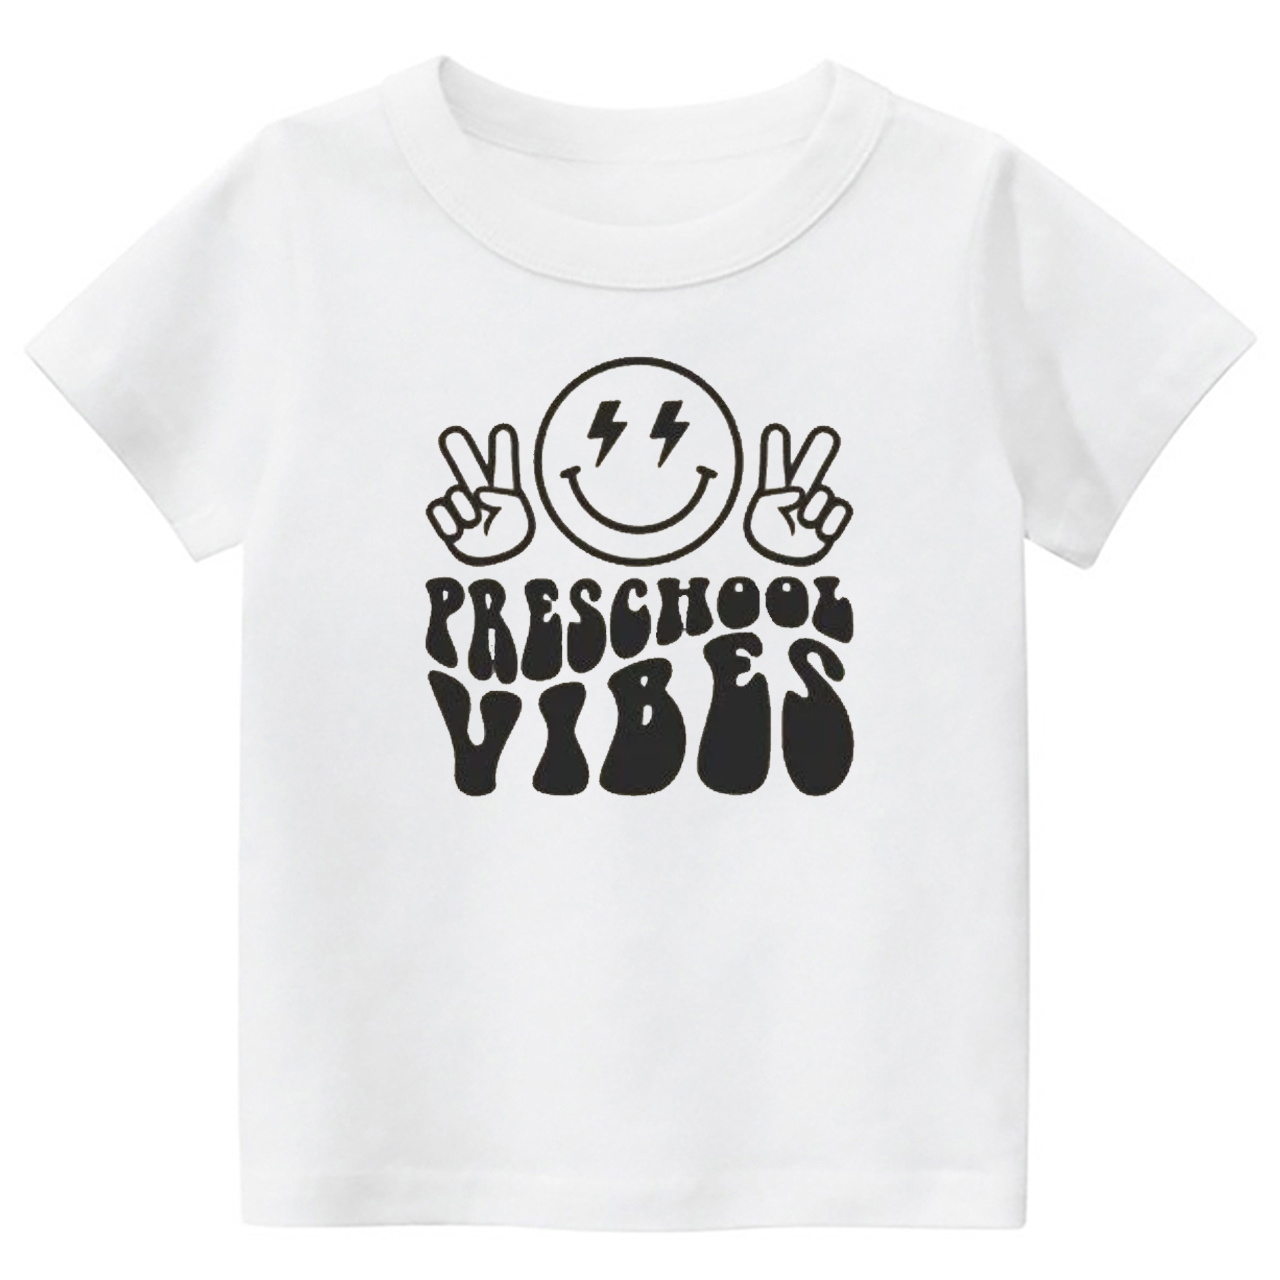 Preschool Vibes Smiley Face Back To School Kids Shirts